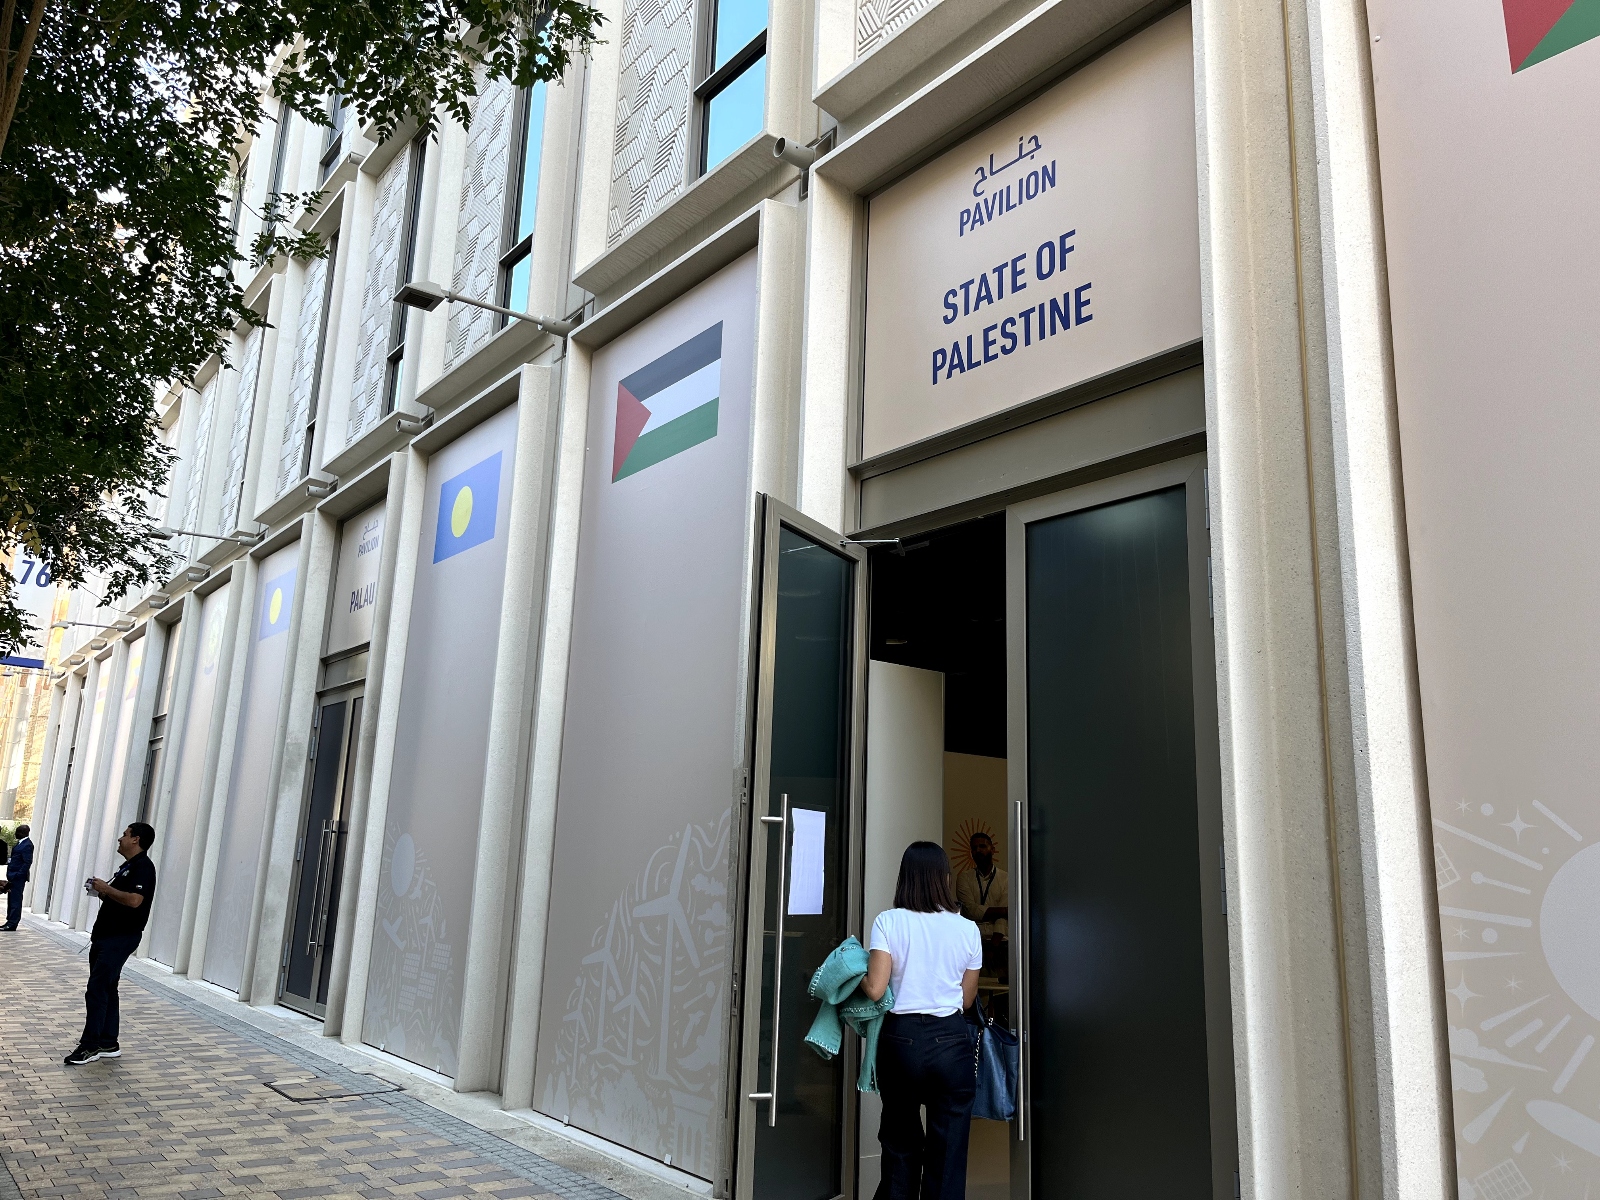 A woman is seen from behind entering the door to a building labeled "Pavilion State of Palestine"